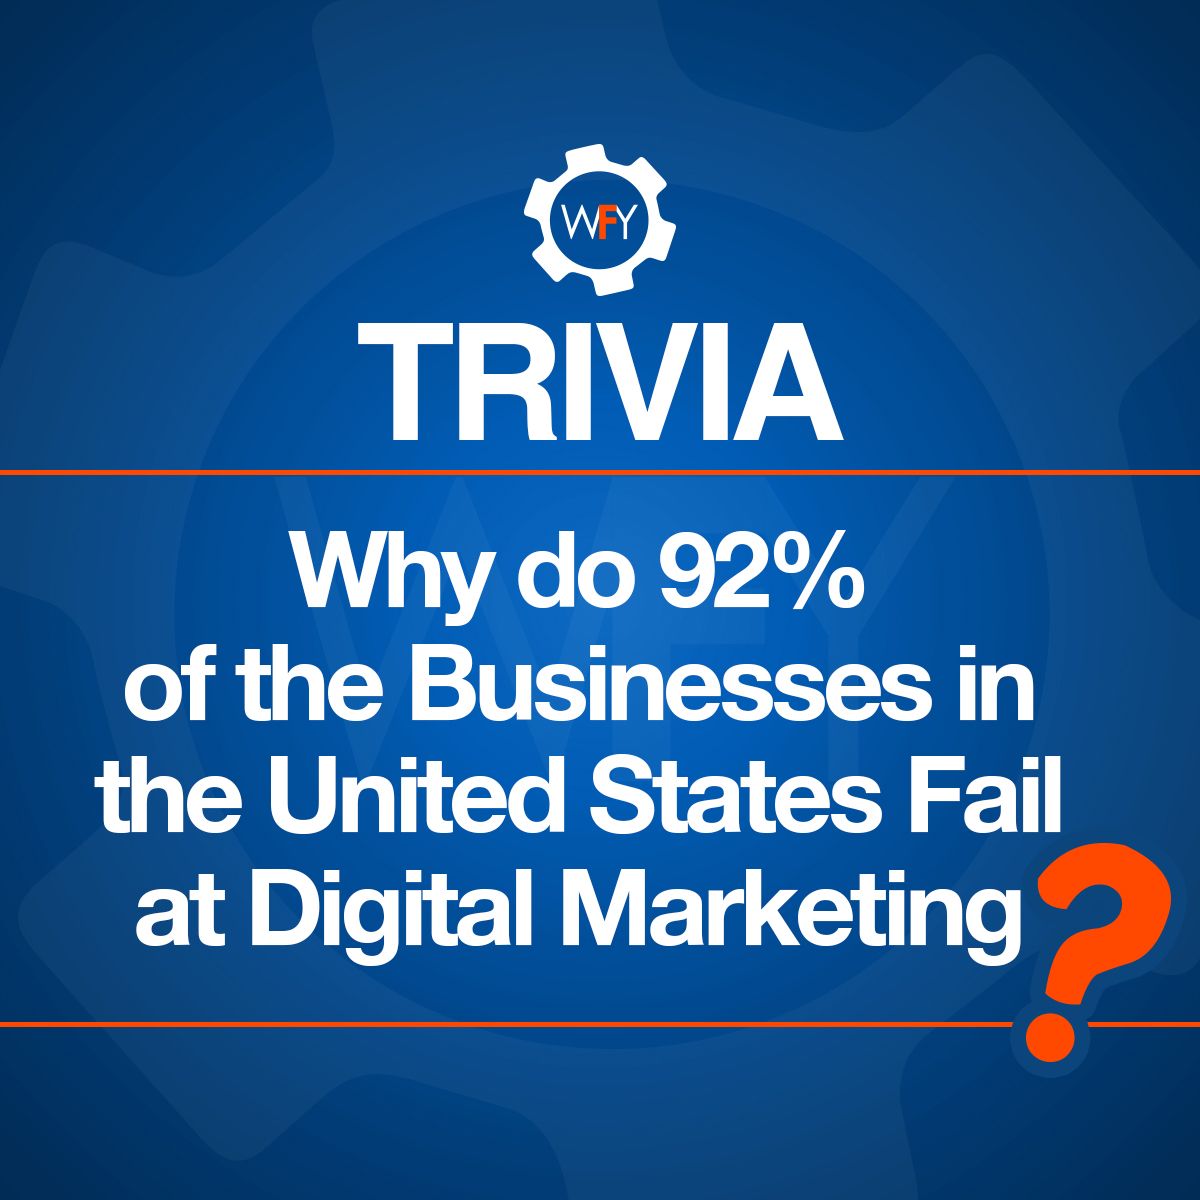 Why does 92% of the Businesses in the United States Fail at Digital Marketing?